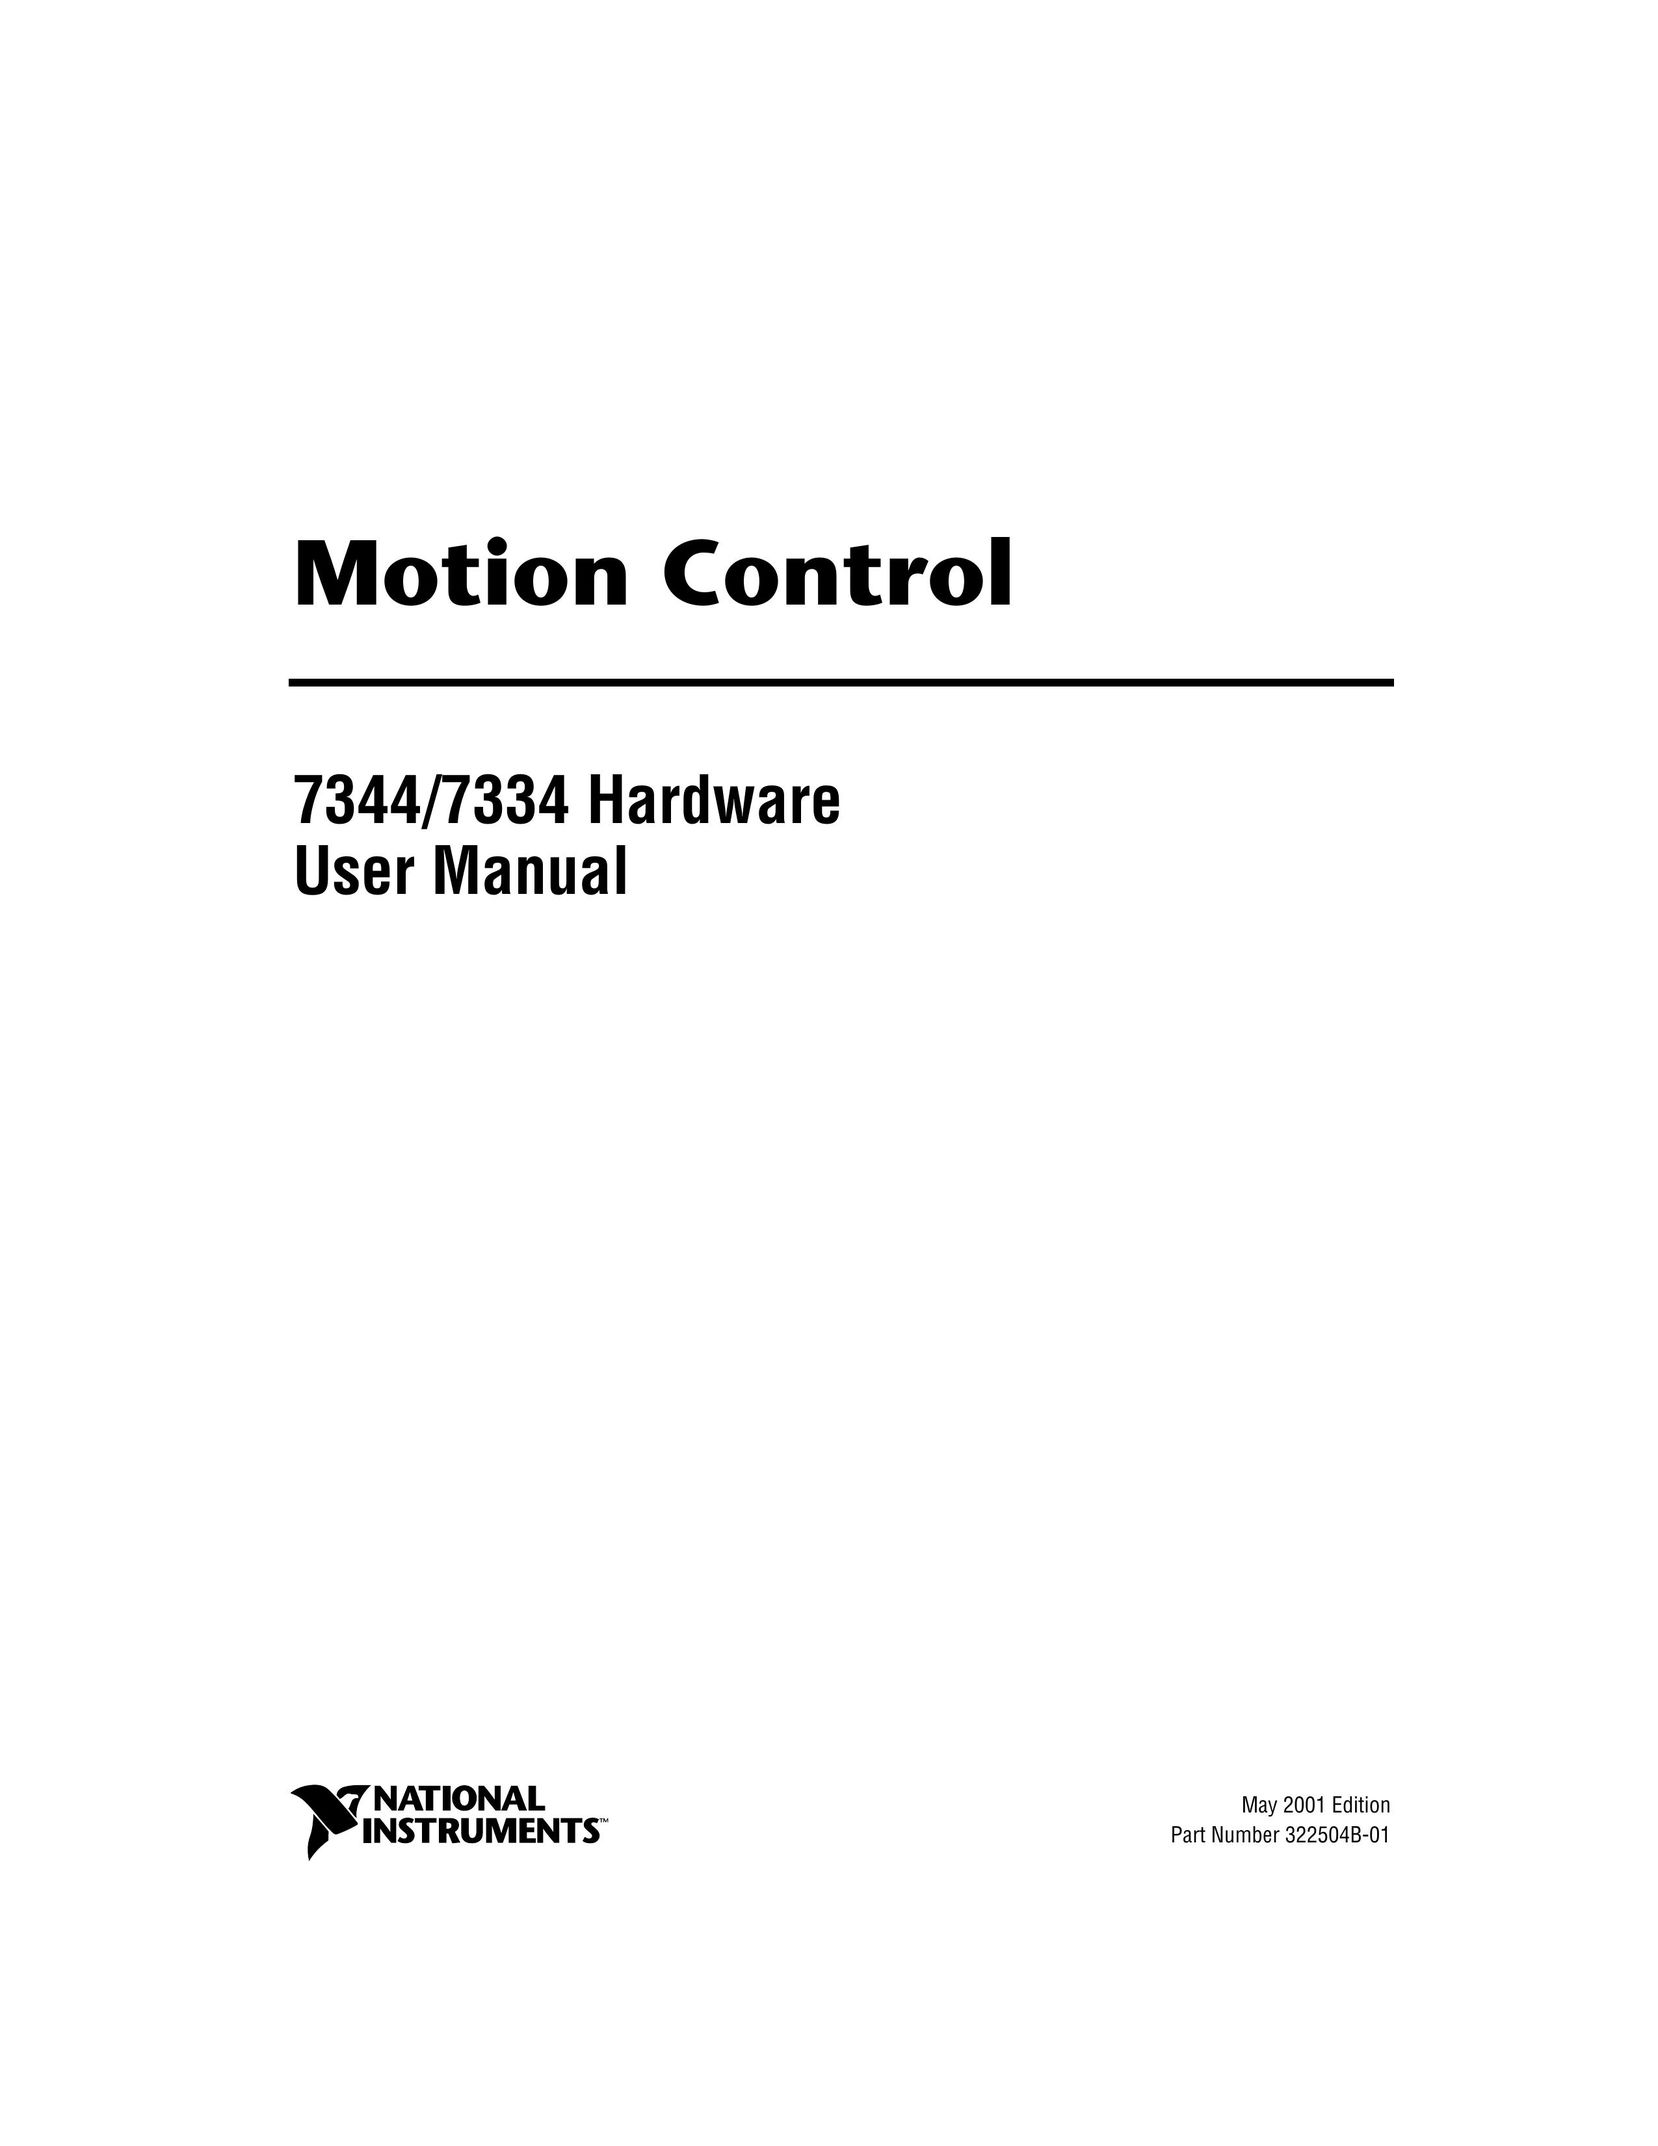 National Instruments 7344 Switch User Manual